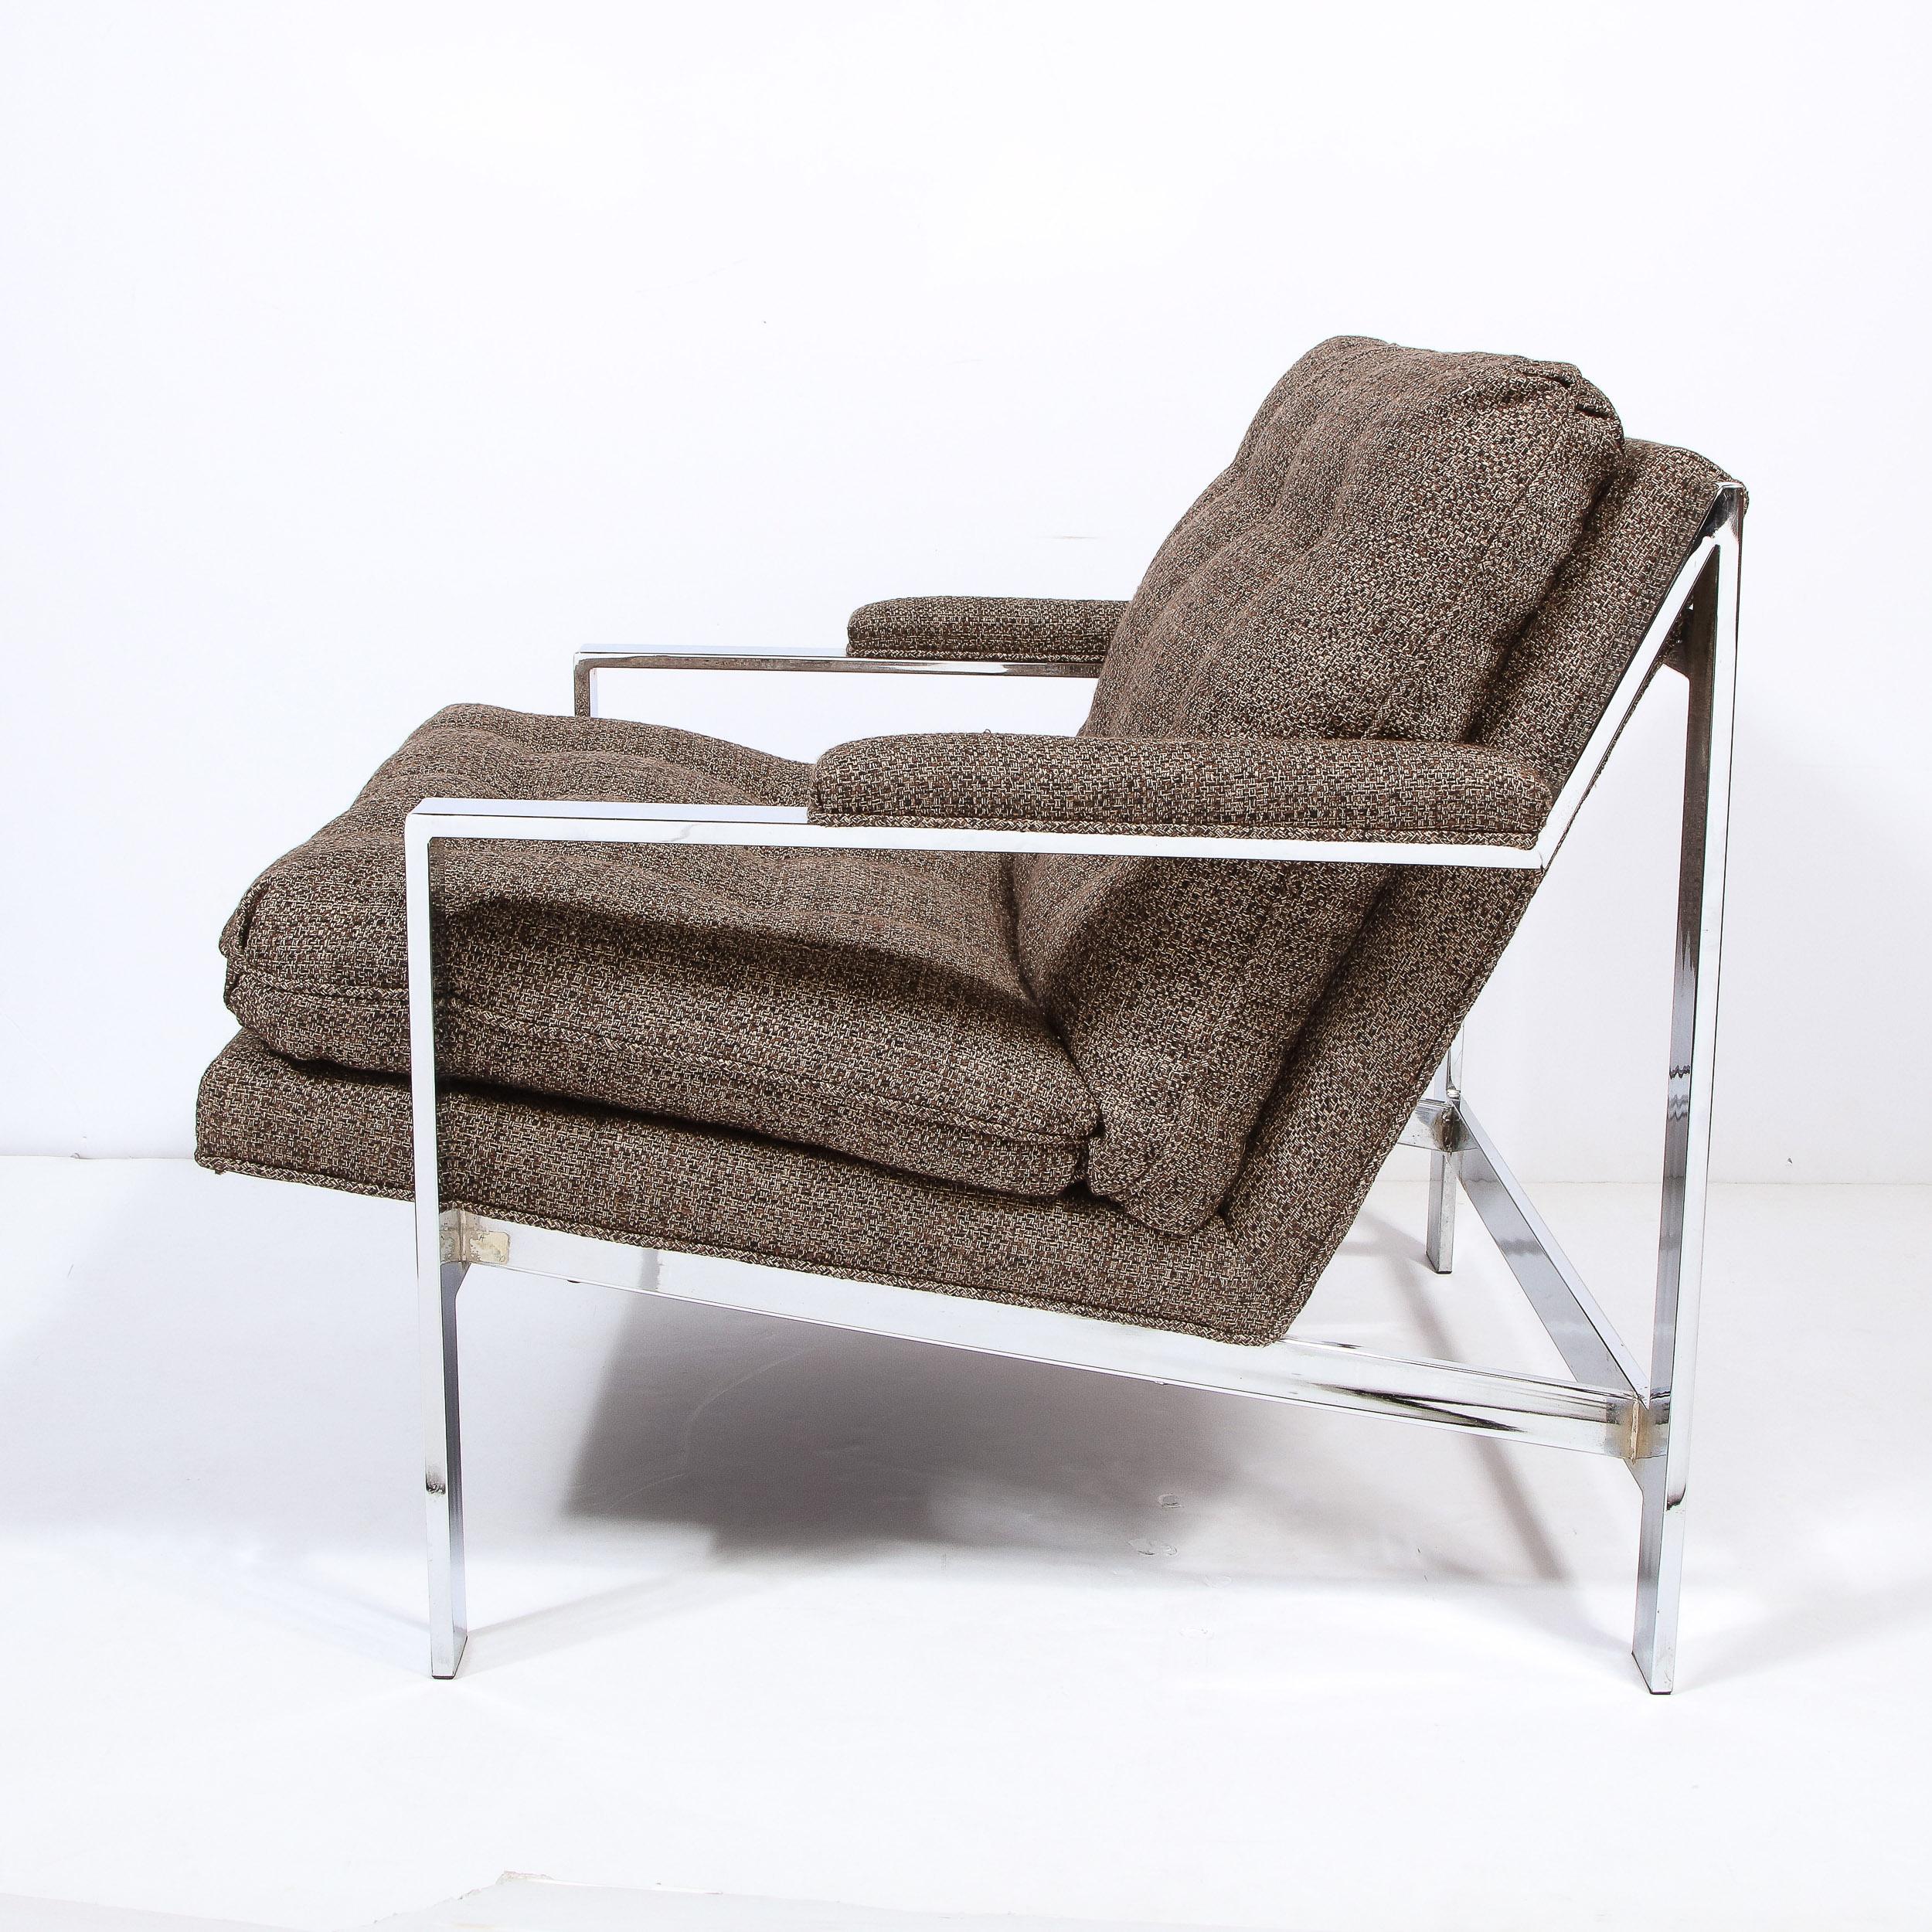 This graphic and refined Mid-Century Modern lounge chair was realized in the United States circa 1970. It features a sculptural silhouette with rectangular arms; aprons; side slats; and back supports all in lustrous chrome. Additionally, the chair